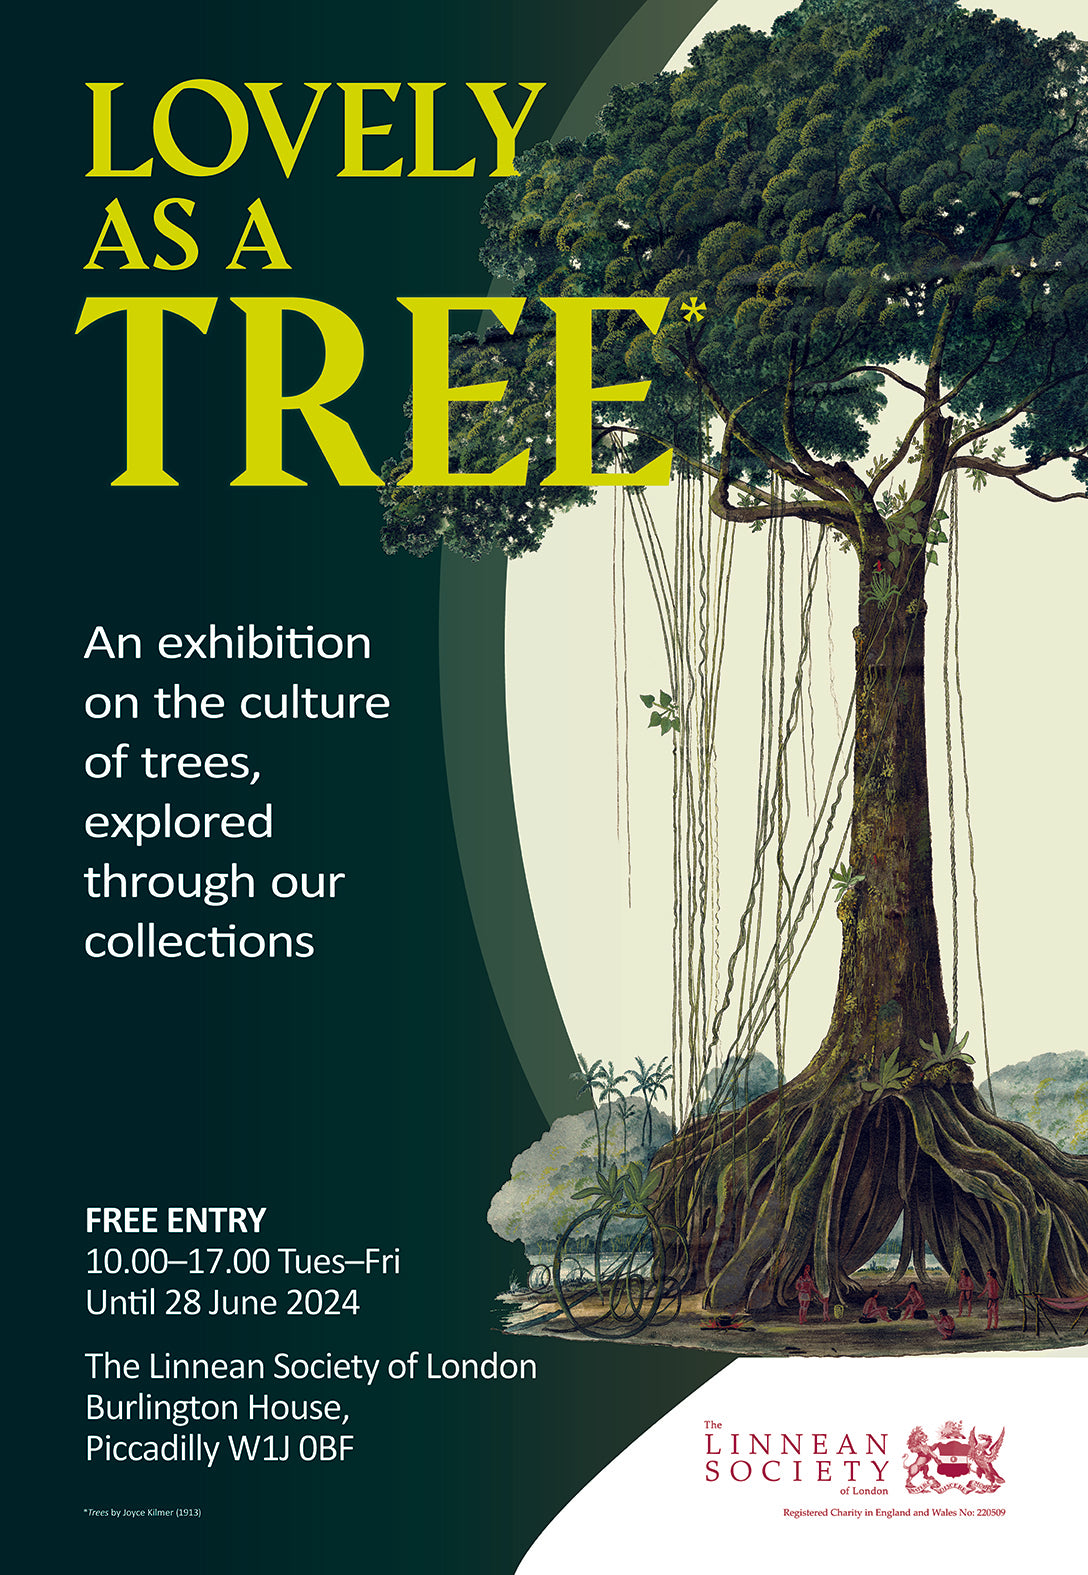 Exhibition poster for Lovely as a Tree at the Linnean Society of London